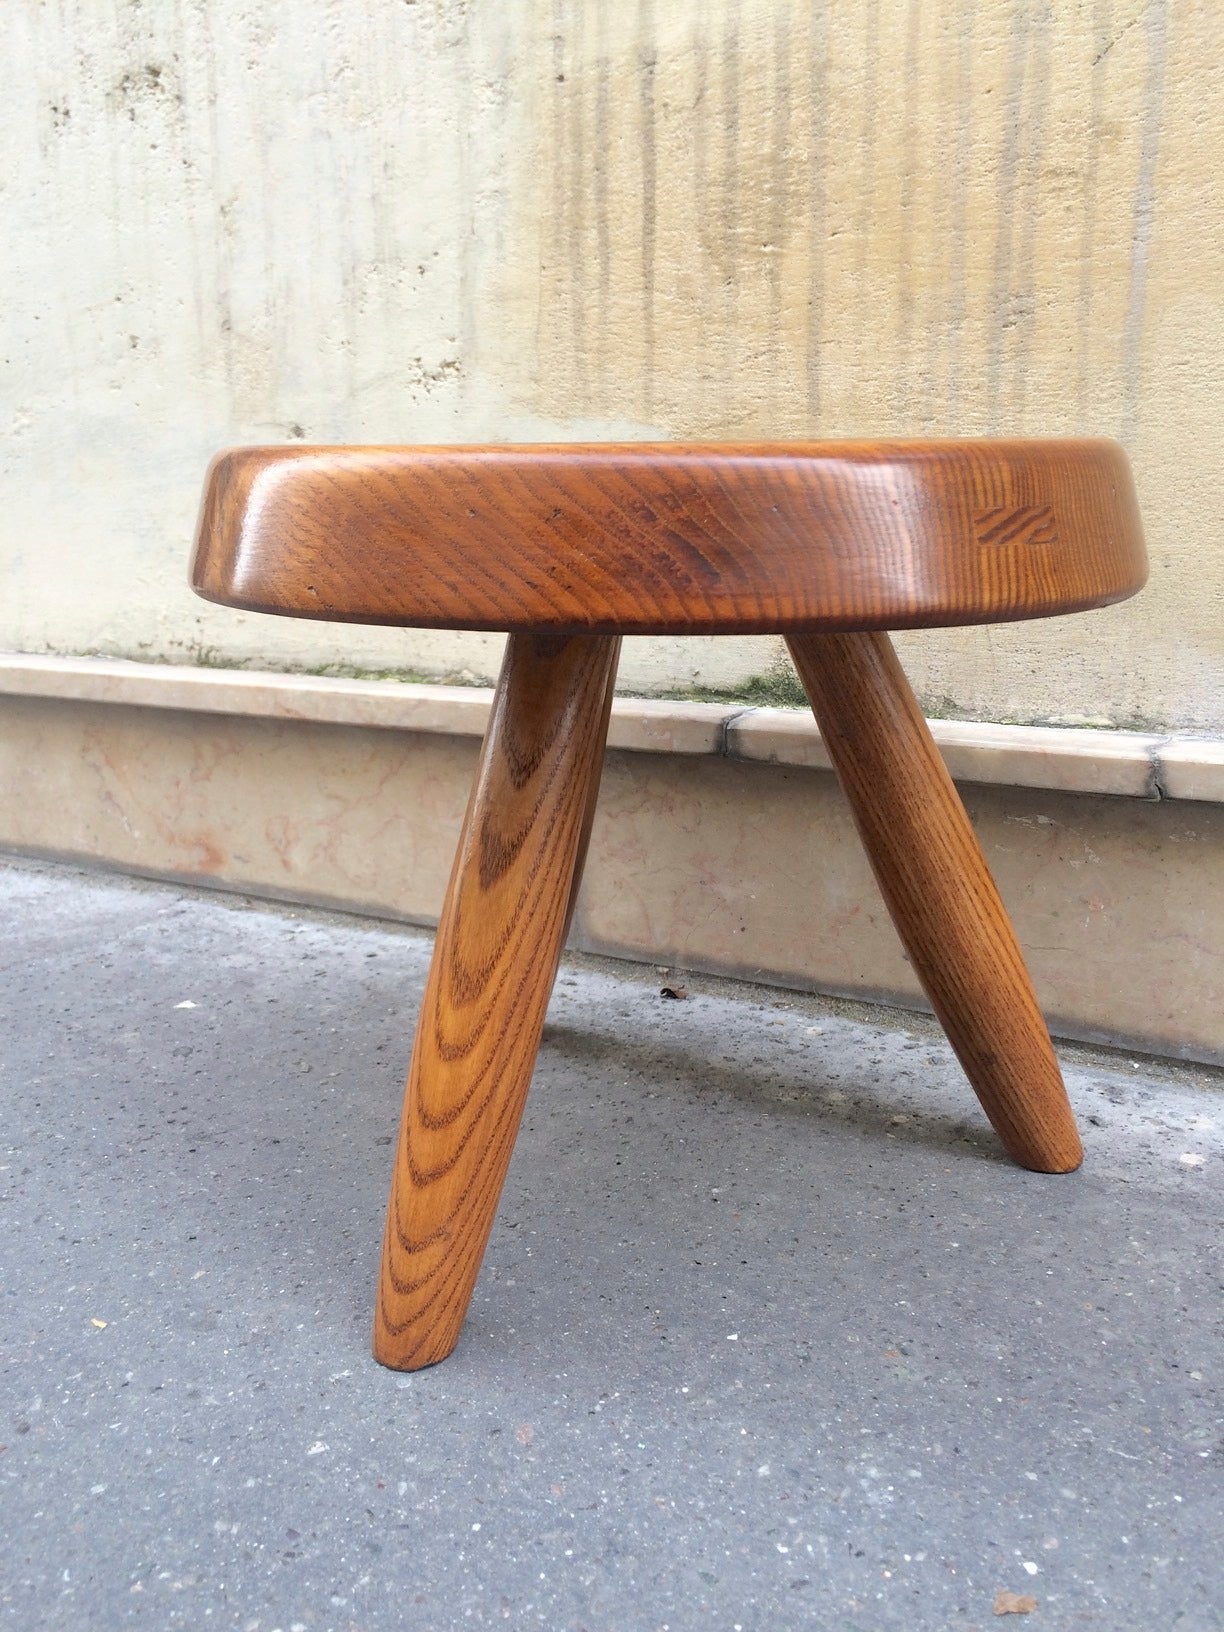 Charlotte Perriand Ash Tree Tripod Stool in Vintage Condition 3